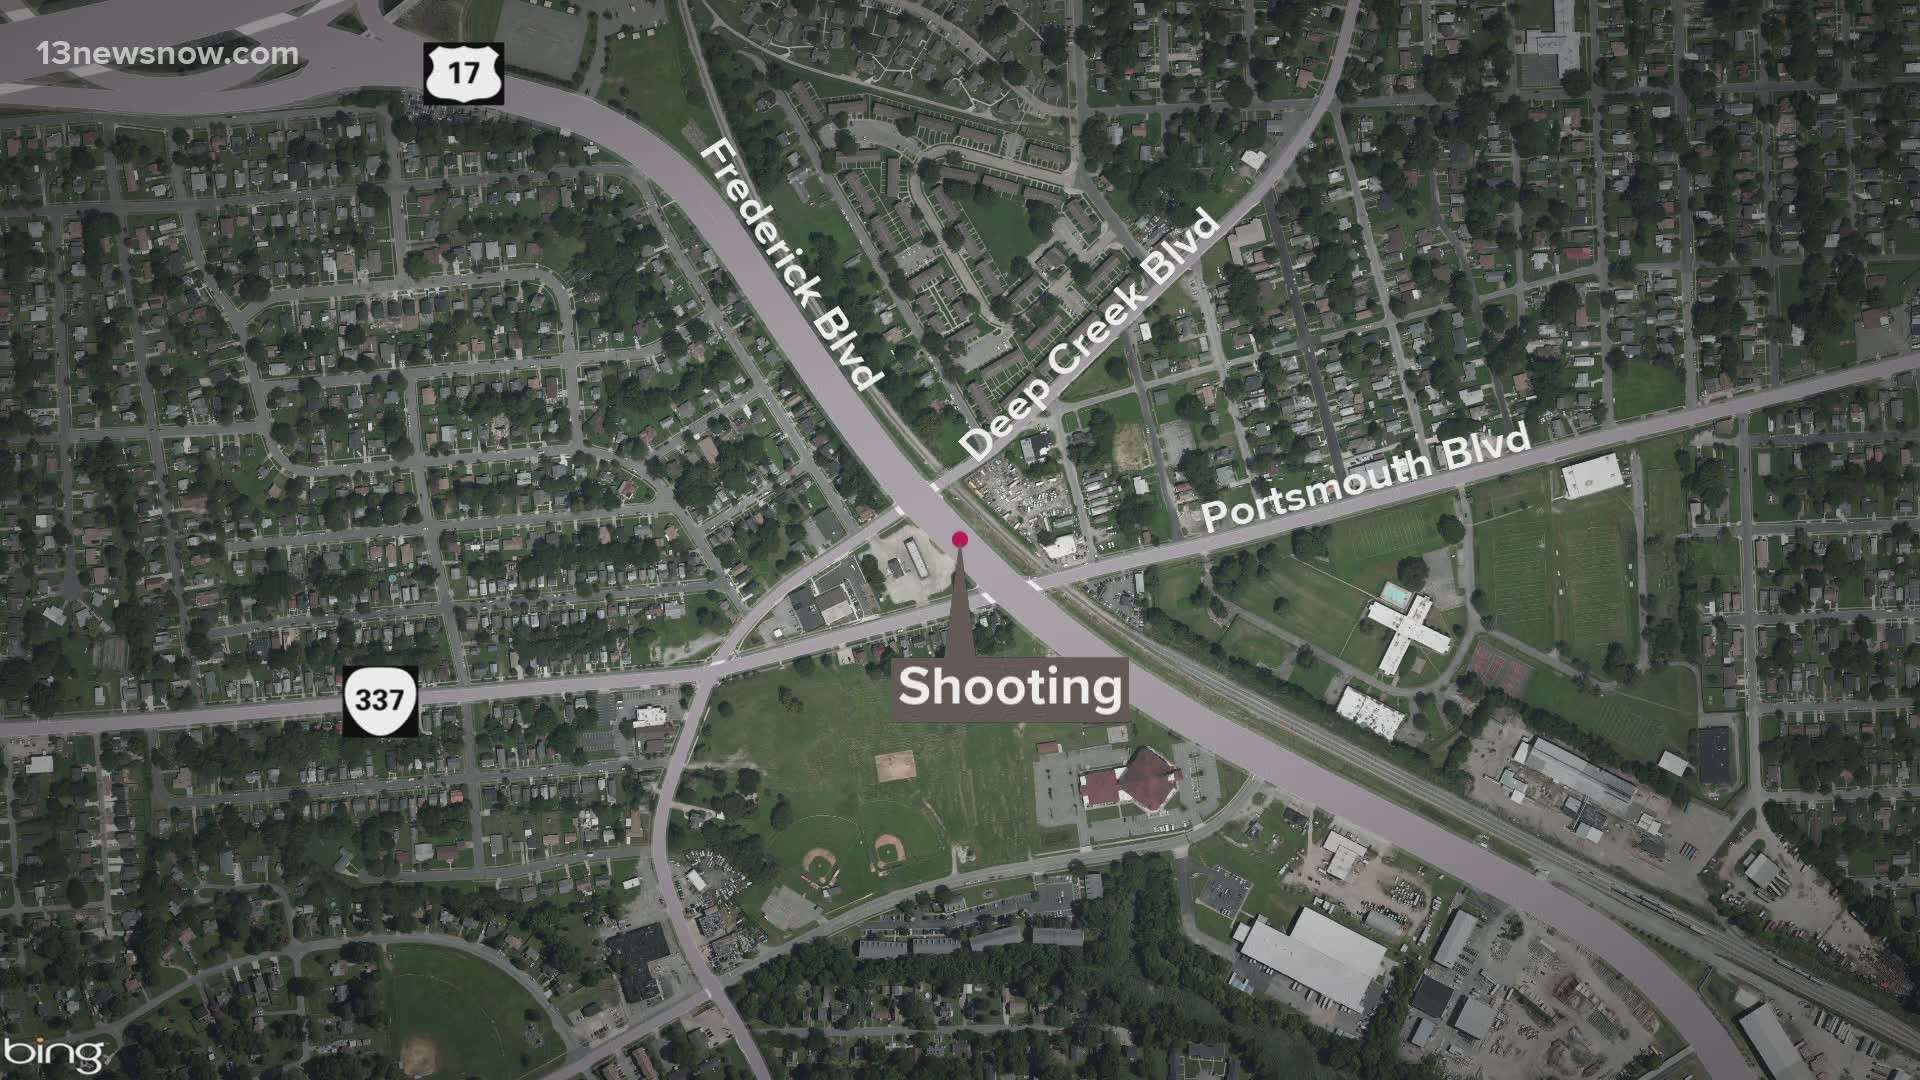 A teenage boy was taken to the hospital after he was shot in Portsmouth. The boy suffered non-life-threatening injuries.